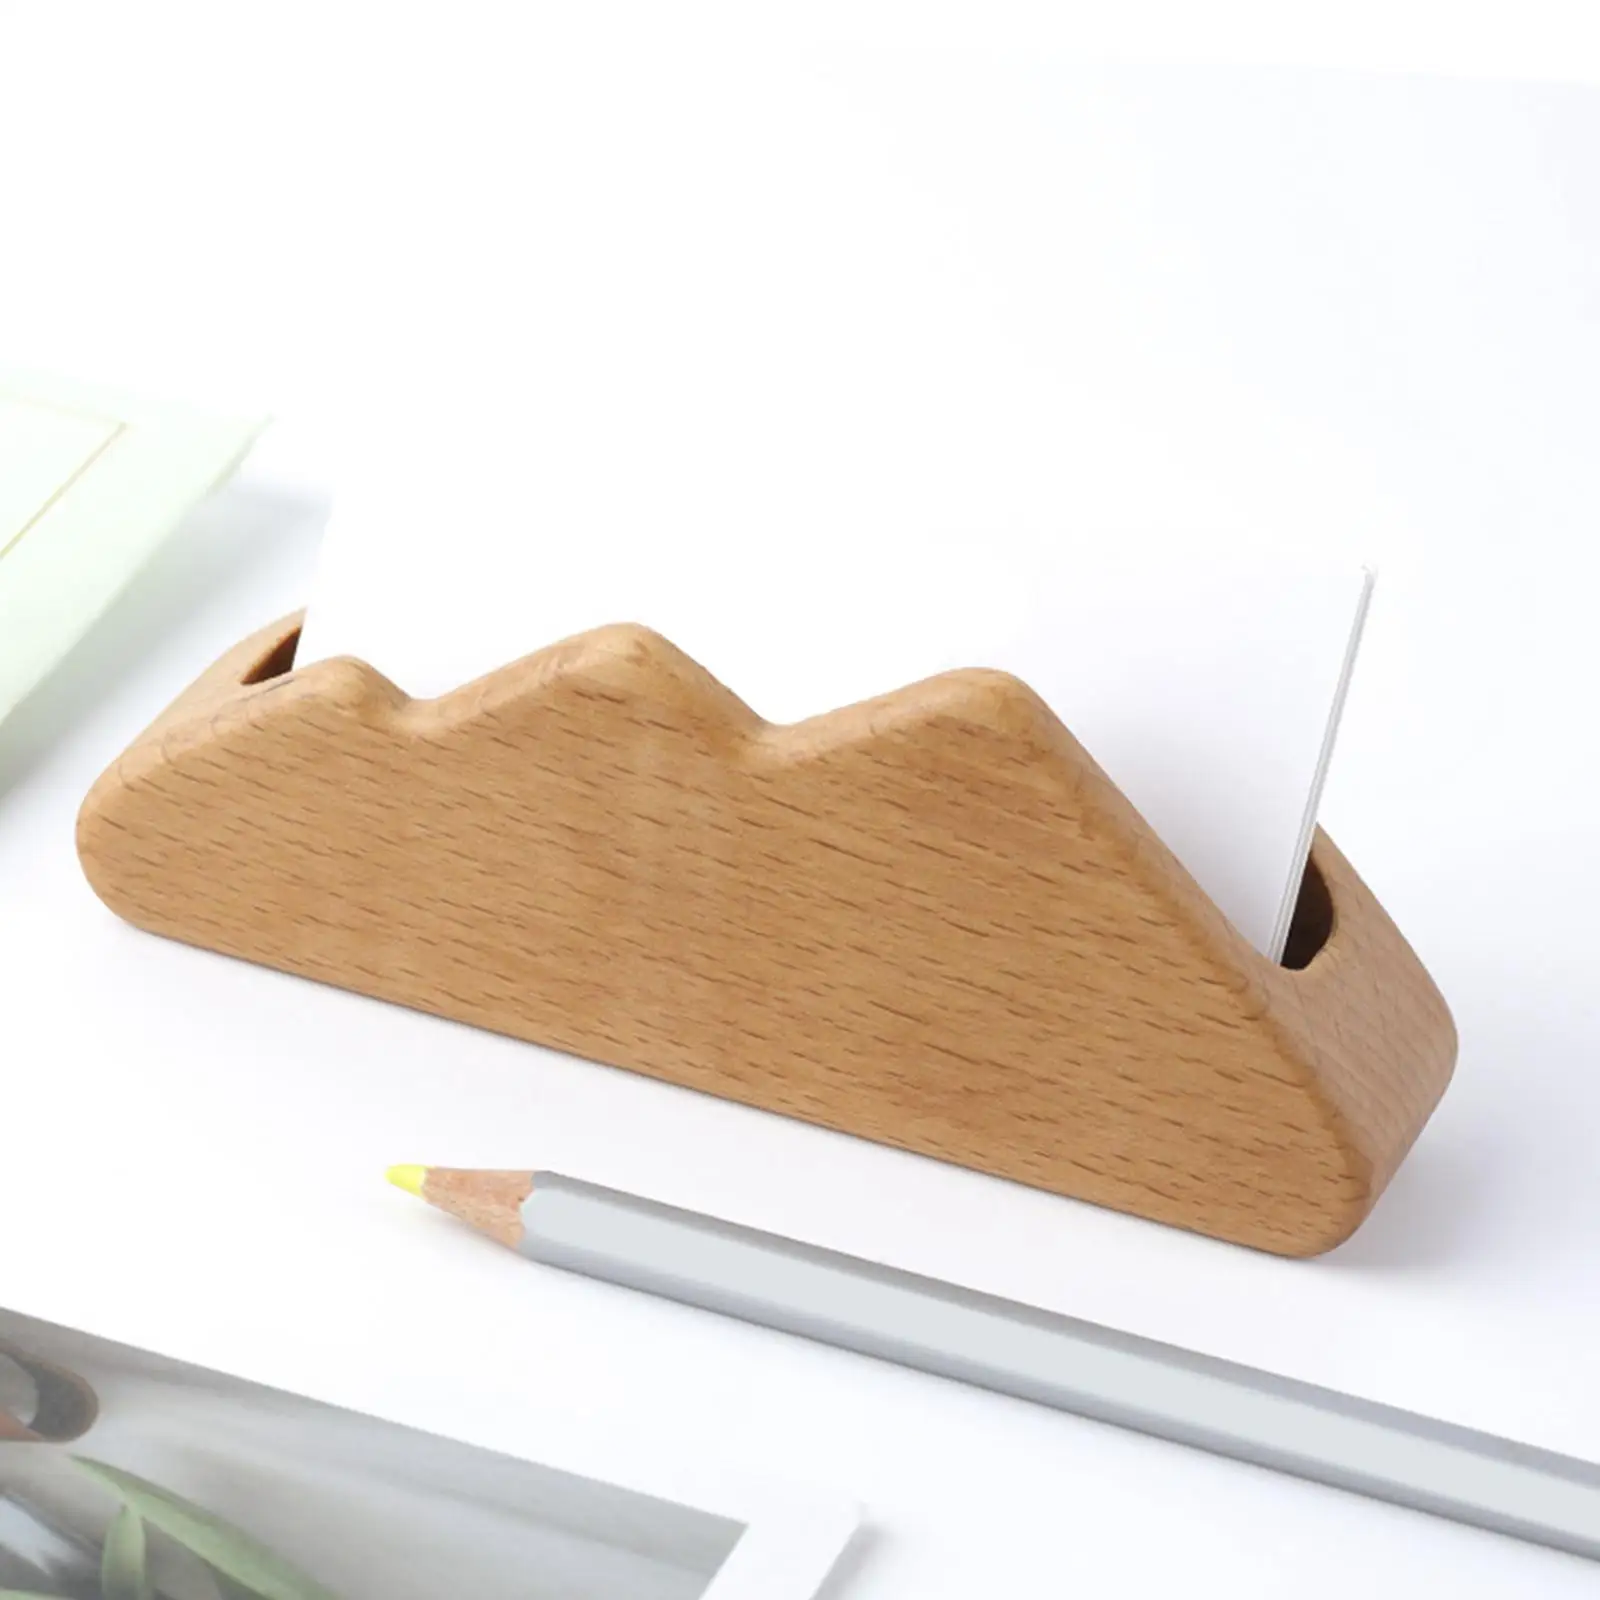 Business Card Holder Display Real Estate Agent Supplies Business Card Stand Wood Rustic for Tabletop Business Desktop Reception